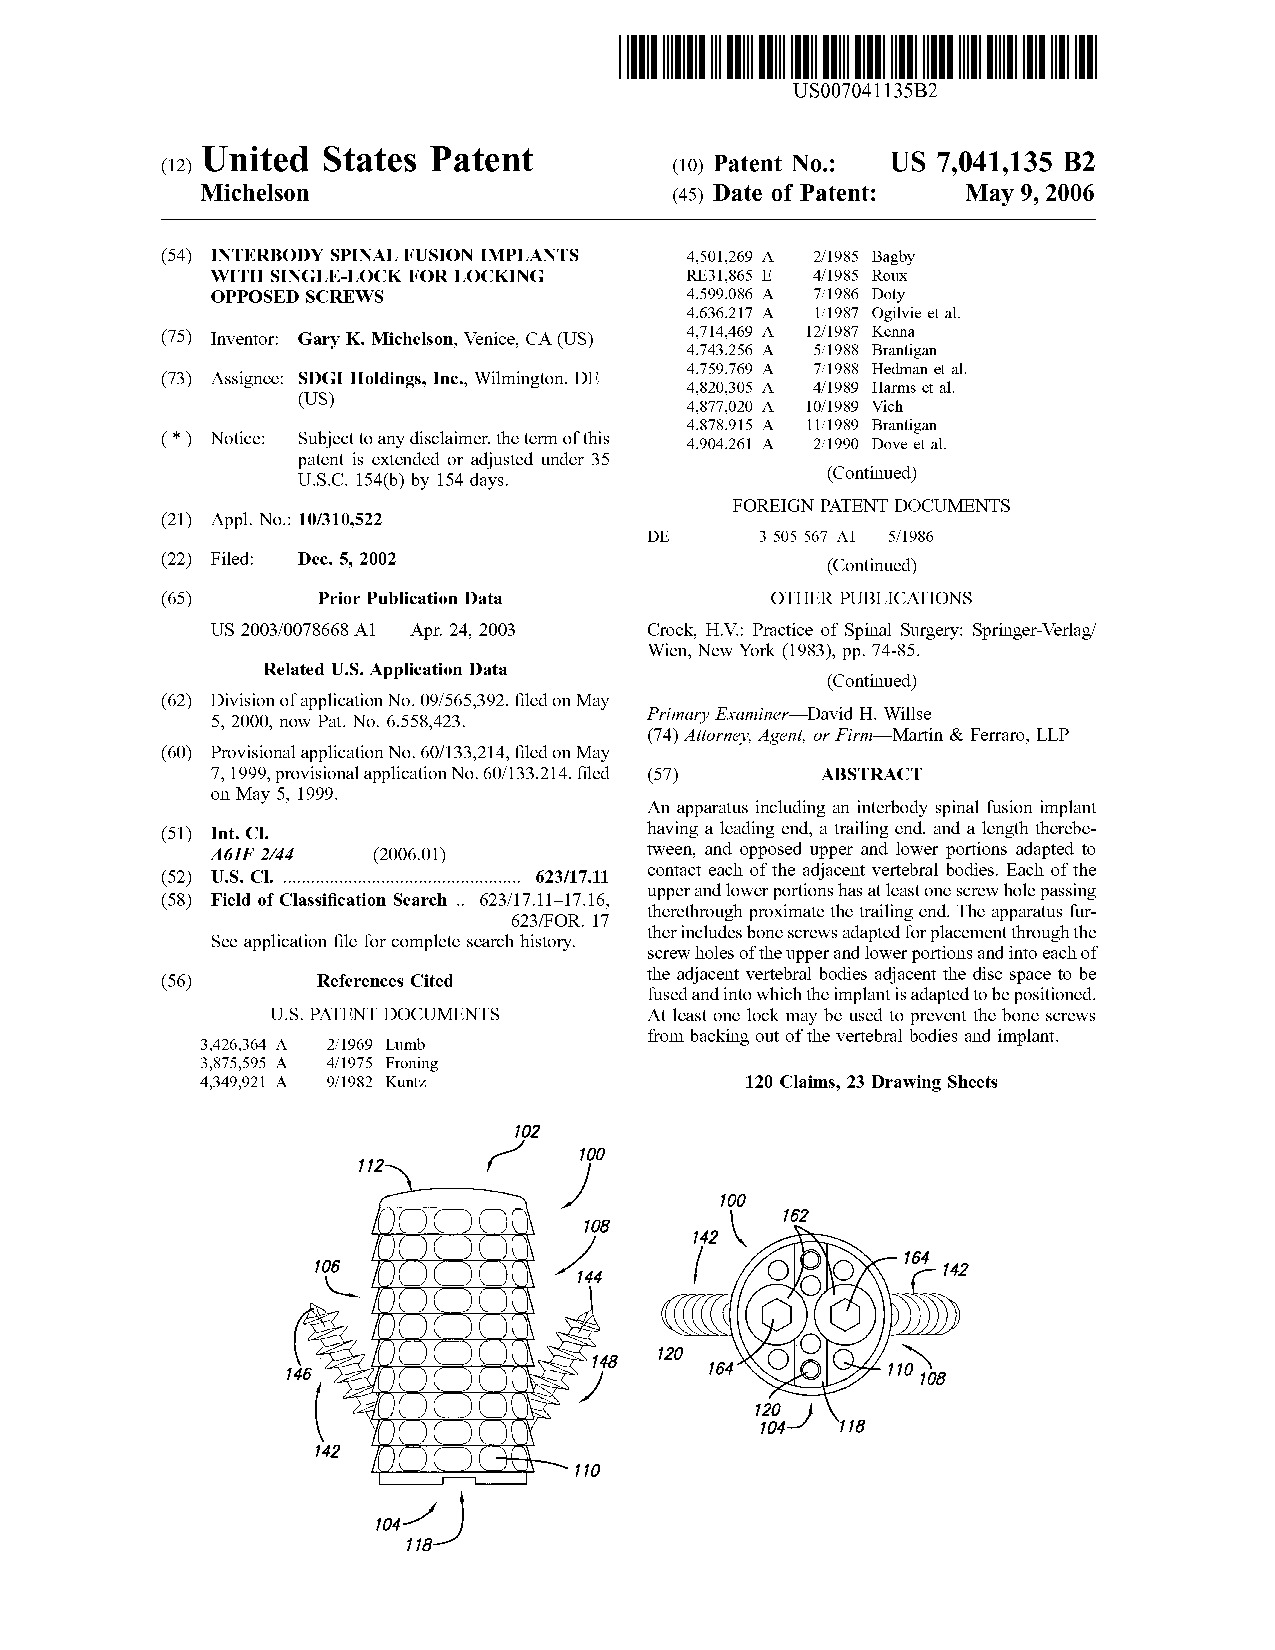 Interbody spinal fusion implants with single-lock for locking opposed     screws - Patent 7,041,135